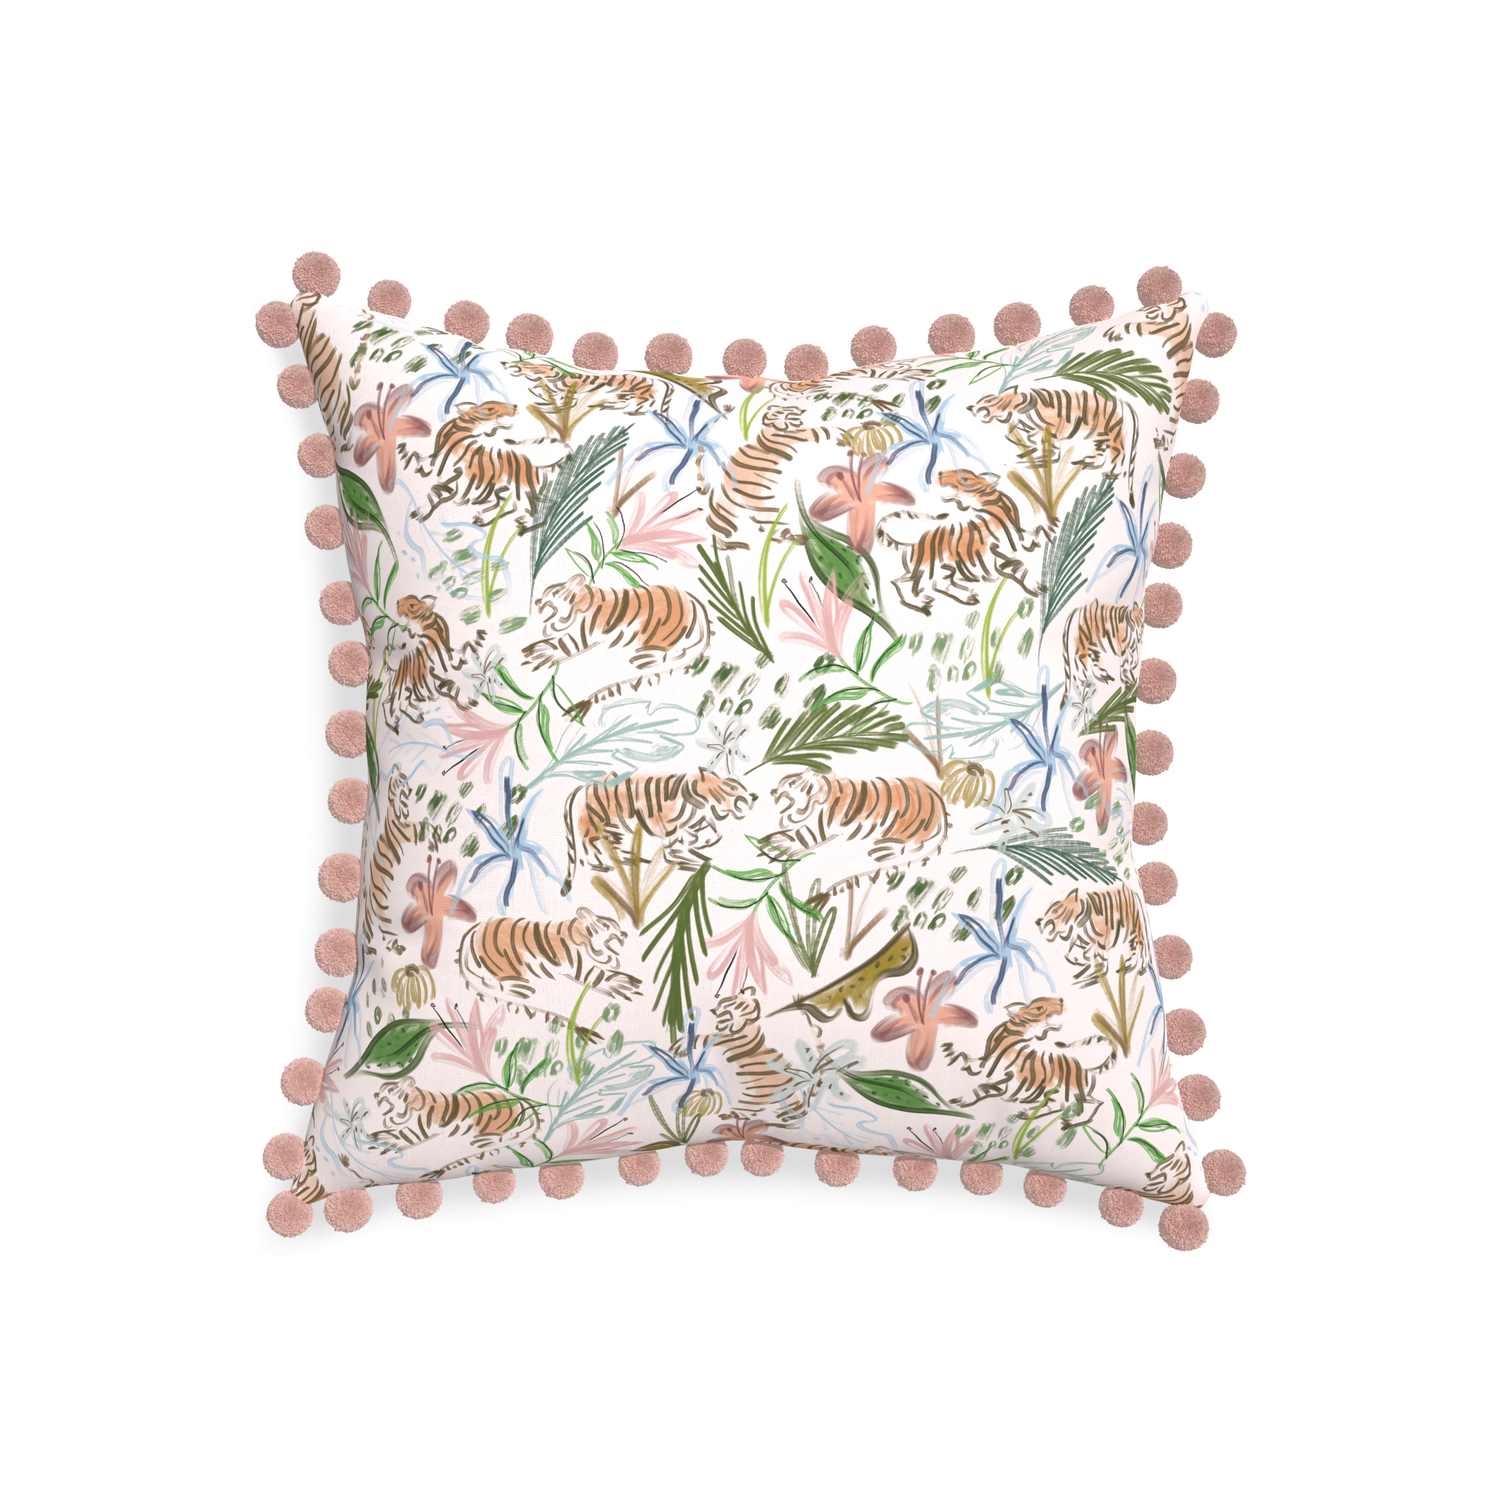 20-square frida pink custom pink chinoiserie tigerpillow with rose pom pom on white background